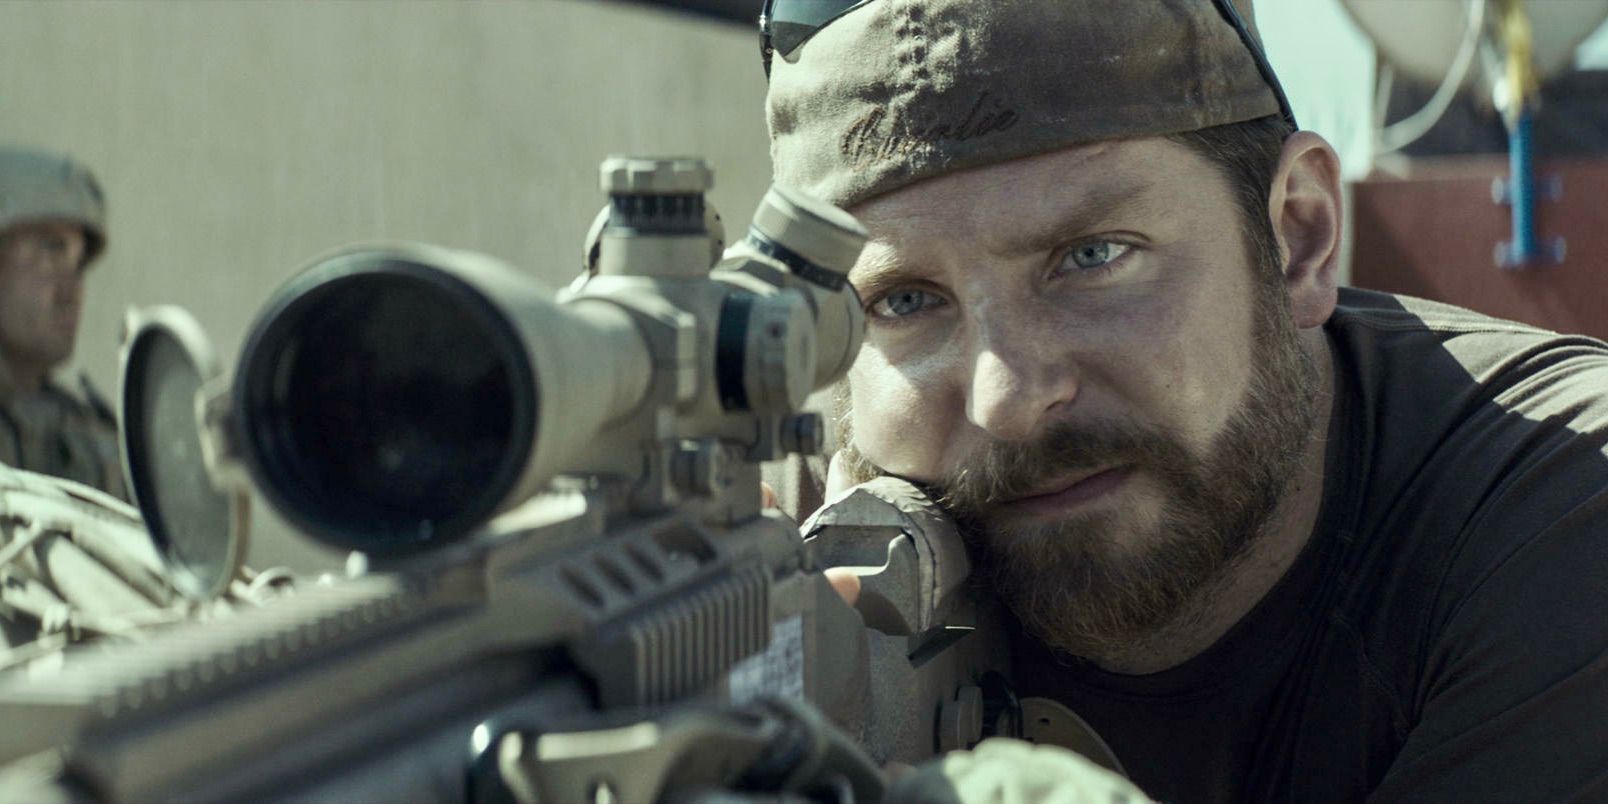 Bradley Cooper as Chris Kyle aims a sniper rifle in American Sniper